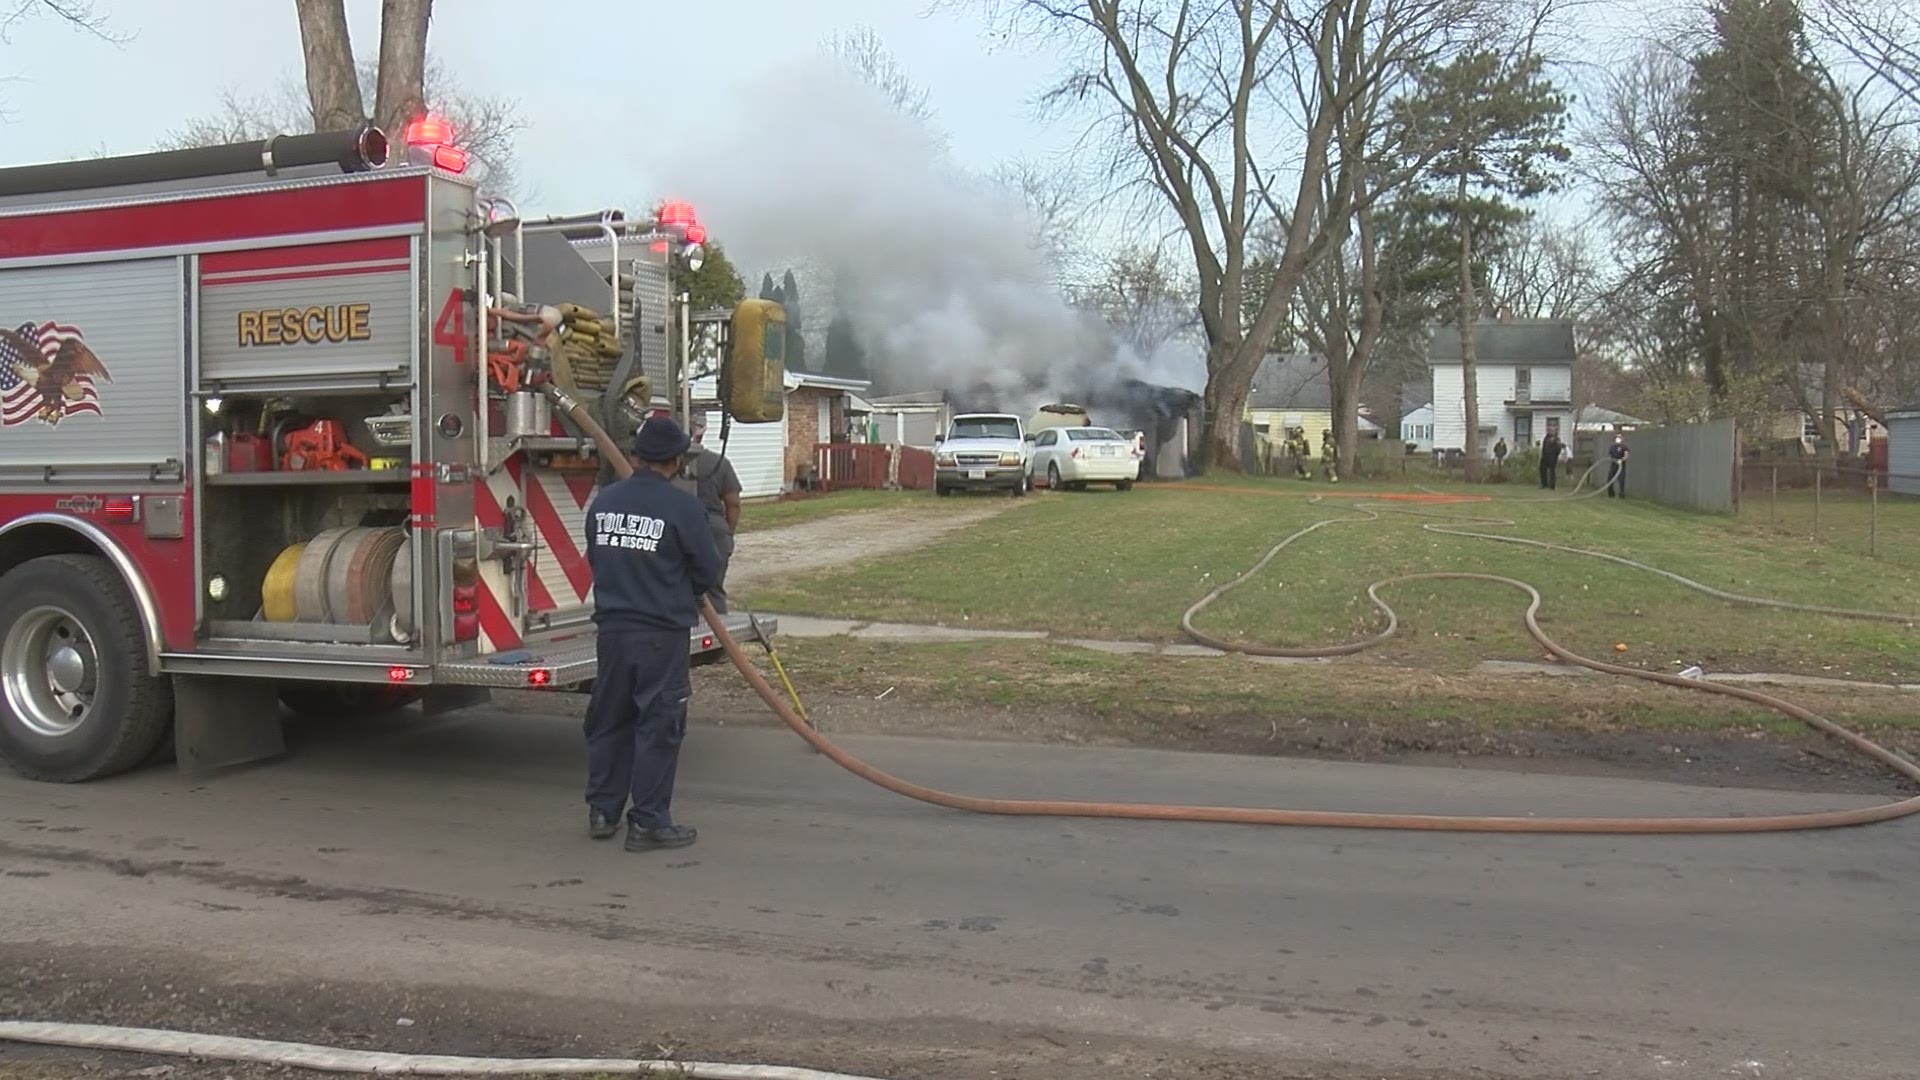 According to Toledo Fire and Rescue, no one was injured in the fire.